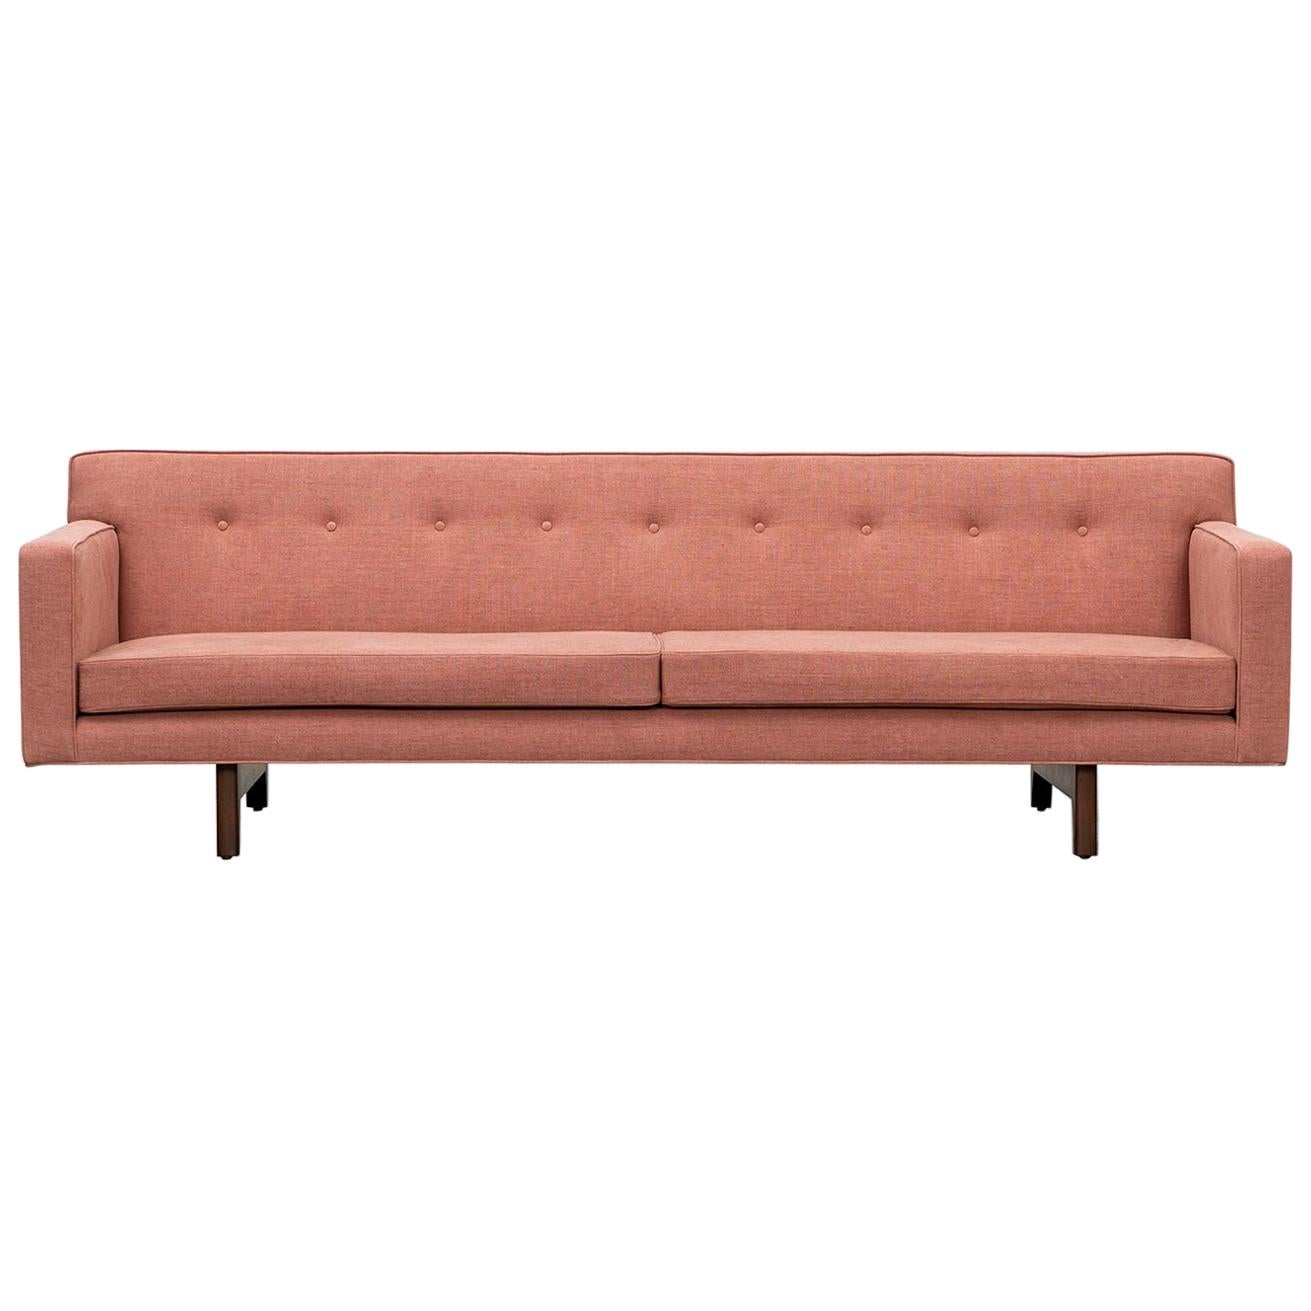 1950s Warm Pink Edward Wormley Sofa 'c' New Upholstery For Sale